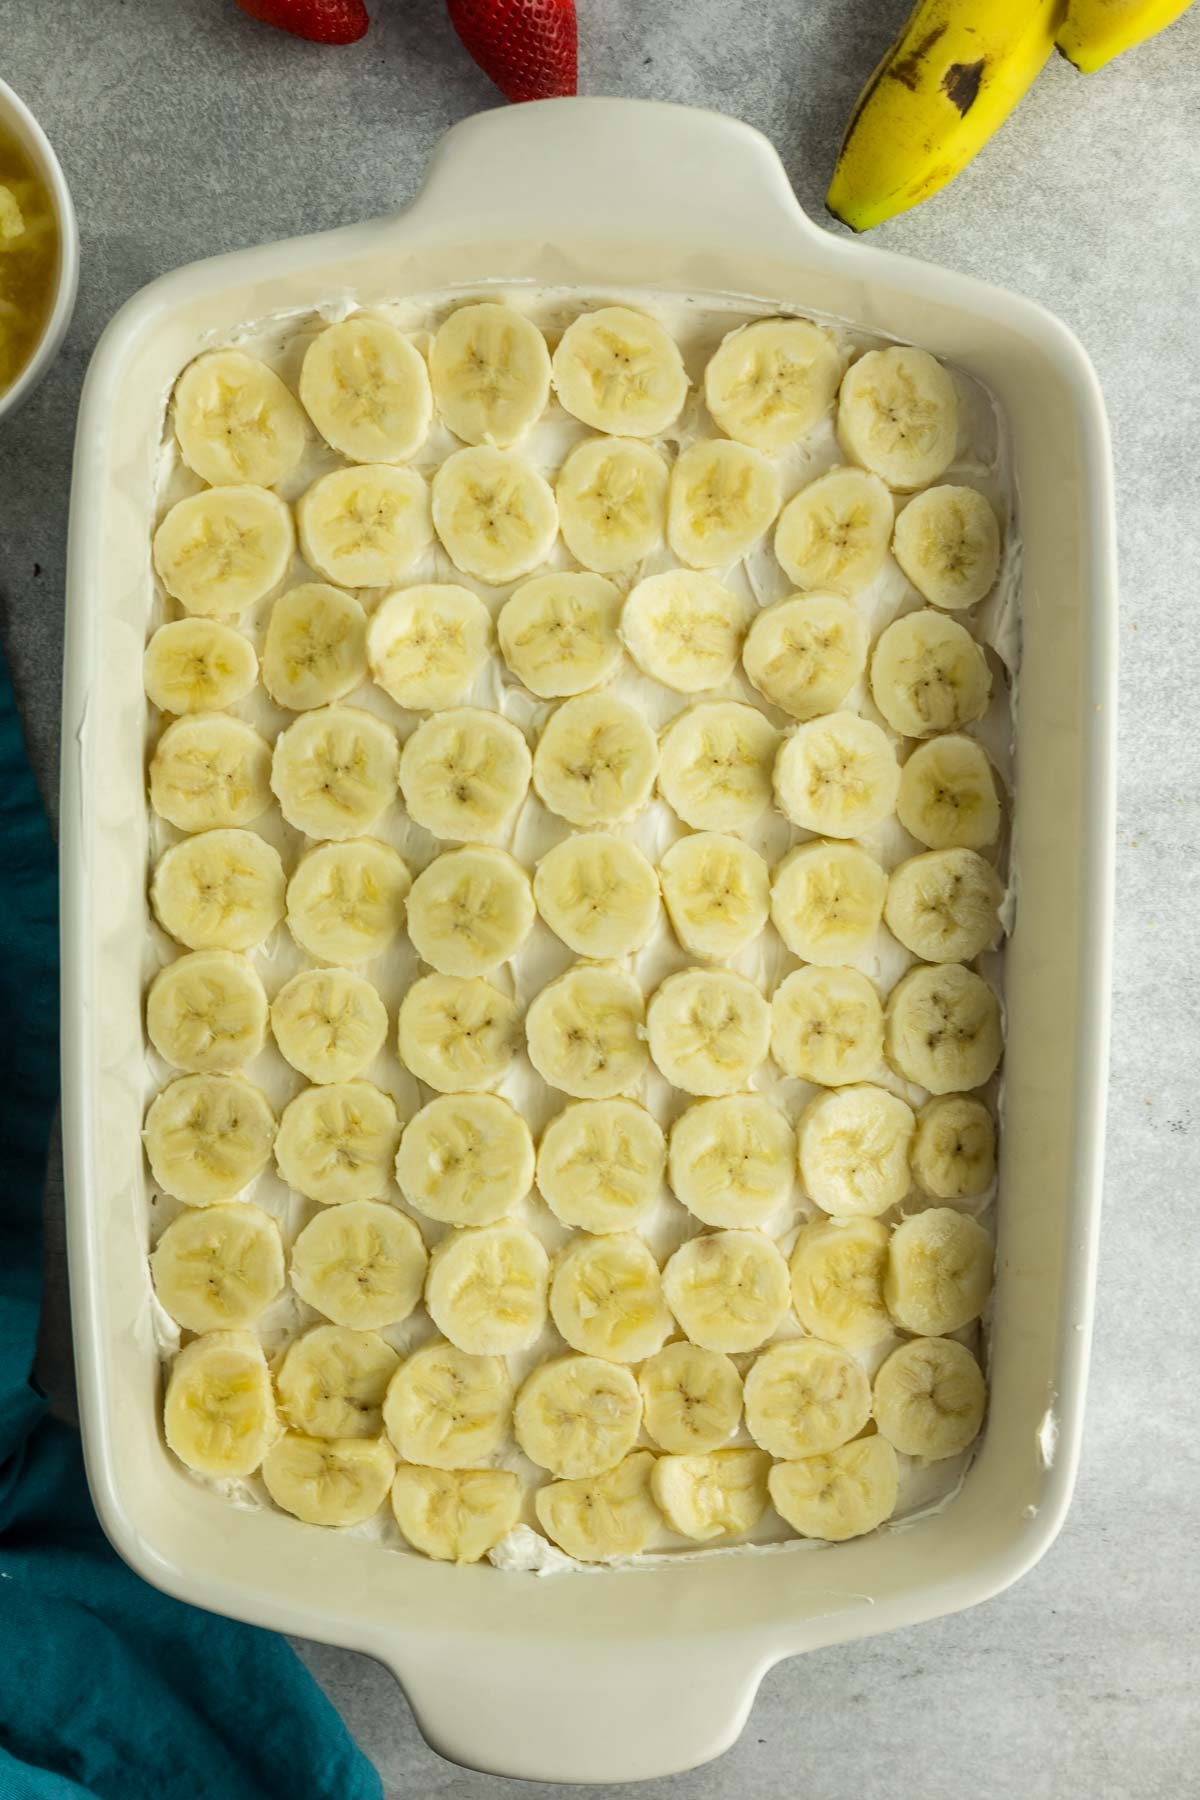 bananas slices on top of cream cheese mixture